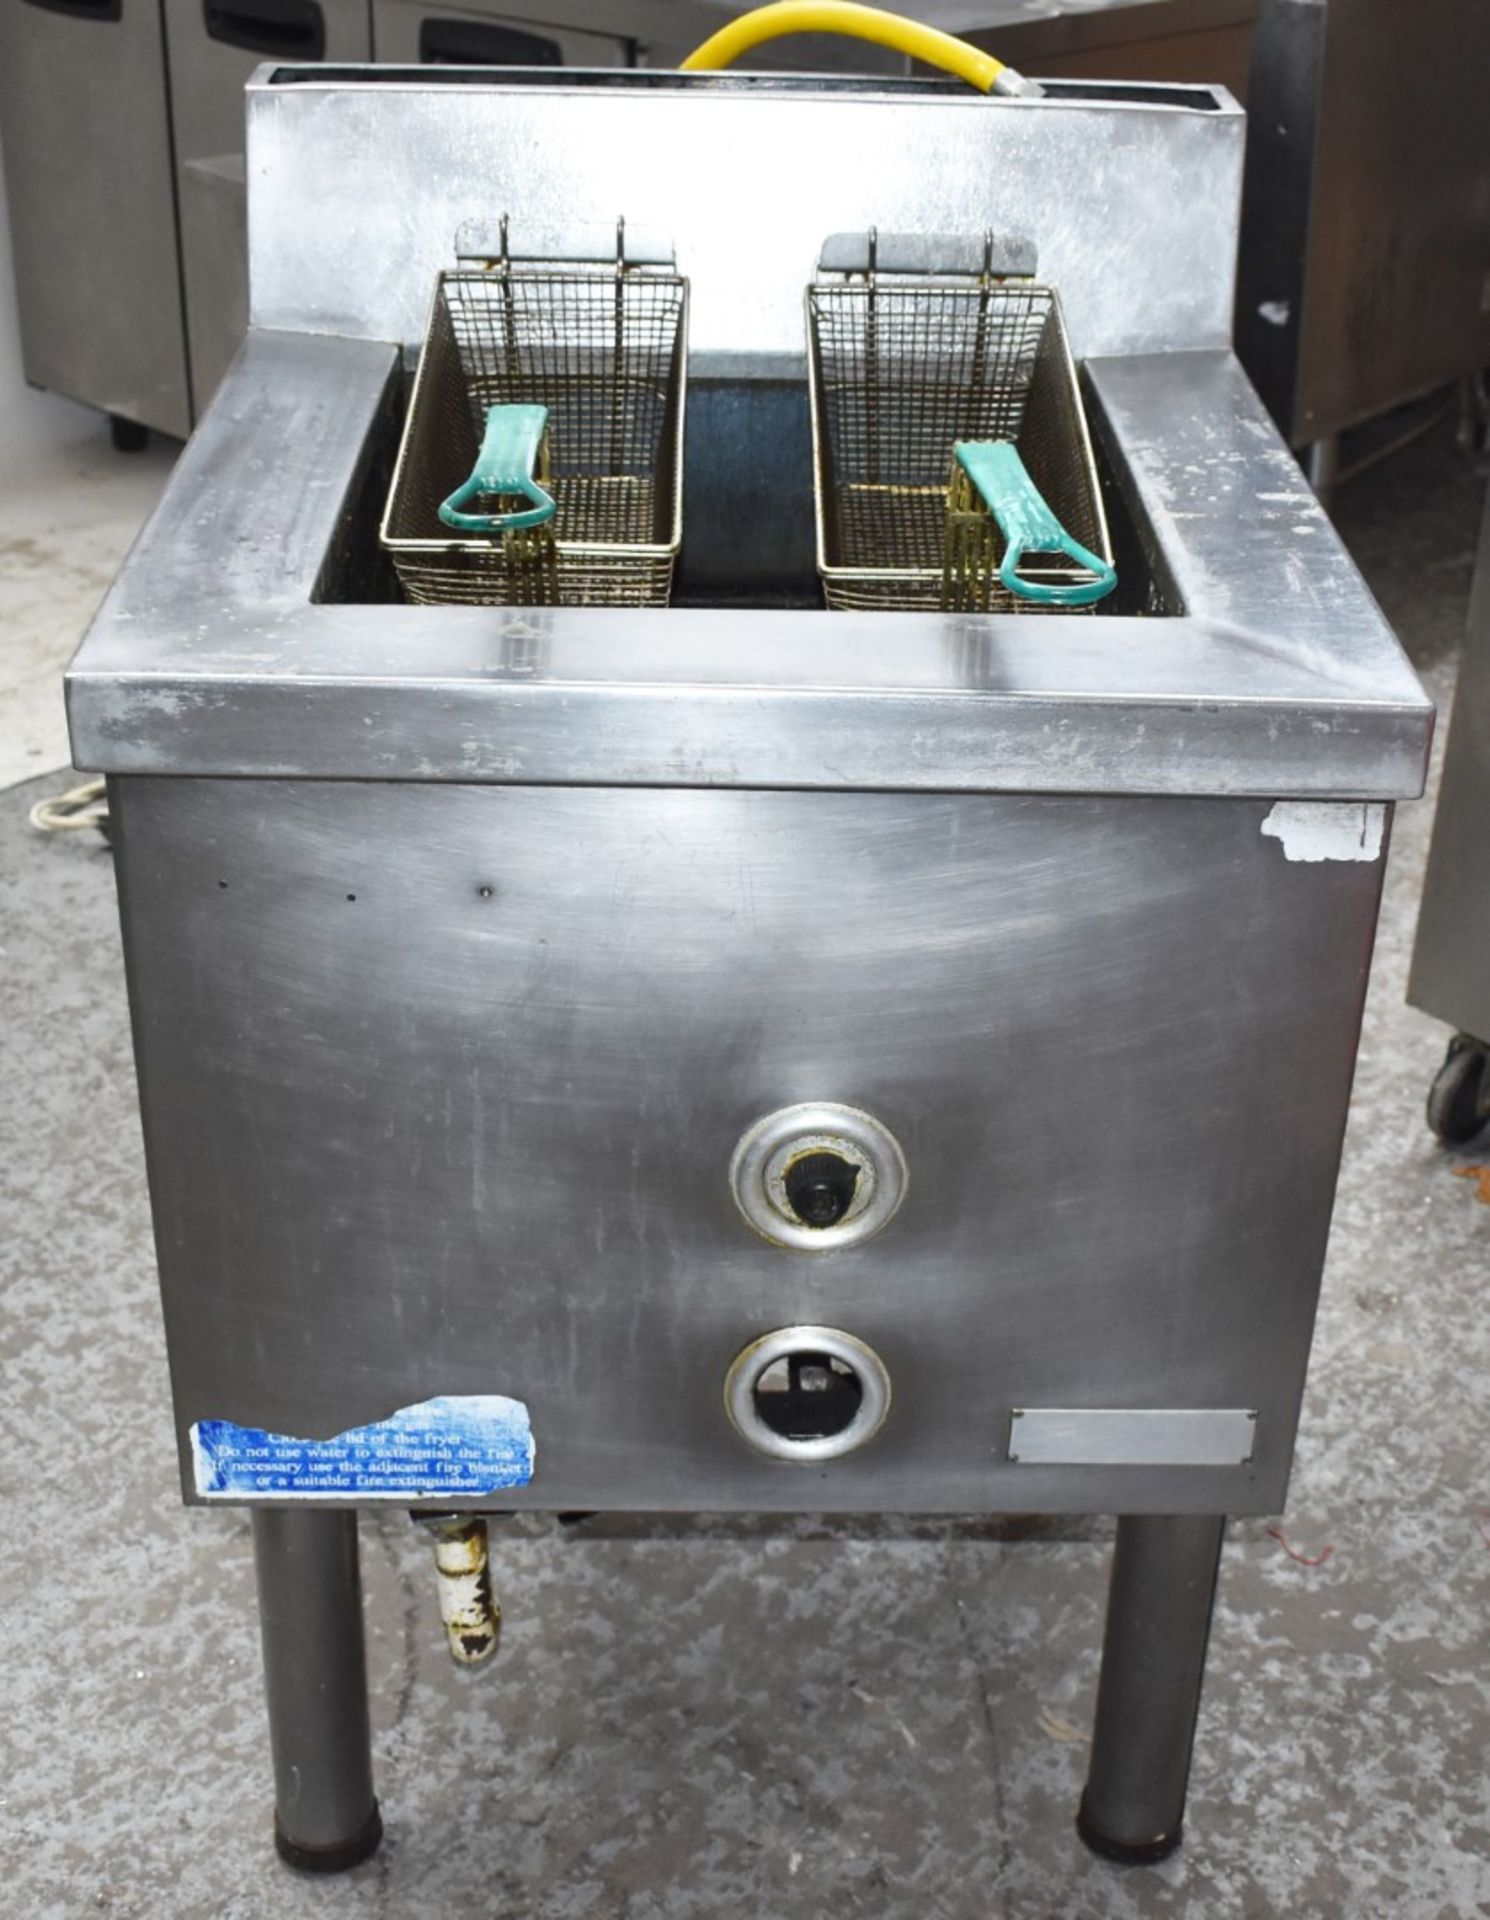 1 x Twin Basket Natural Gas Fryer With Stainless Steel Finish - H89 x W65.5 x D70 cms - CL459 - - Image 4 of 7